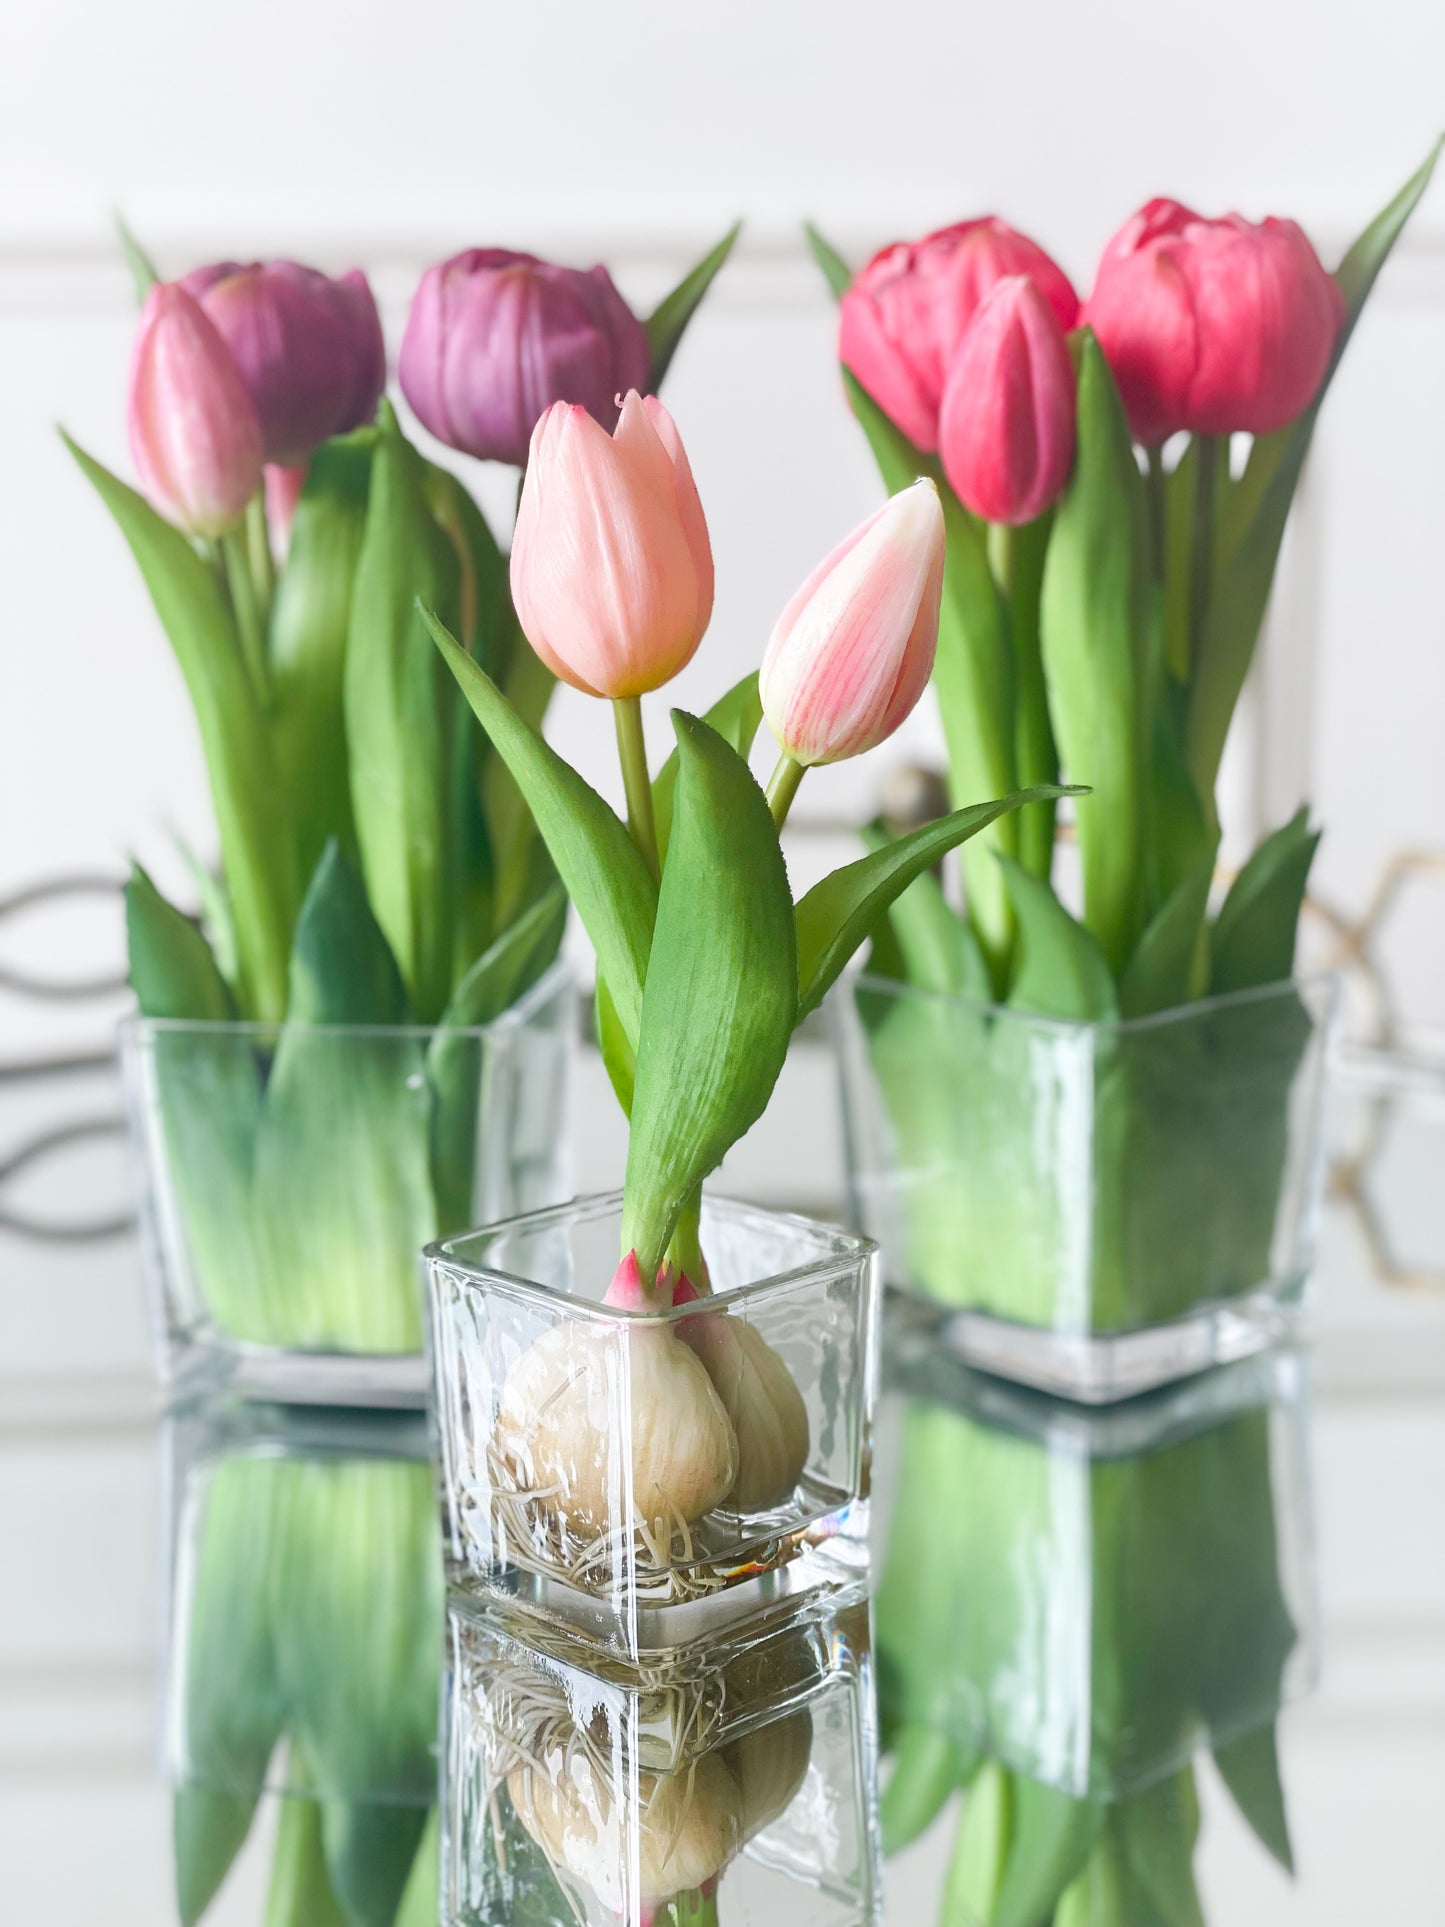 Soft Pink Tulip Bud And Bulb In Vase